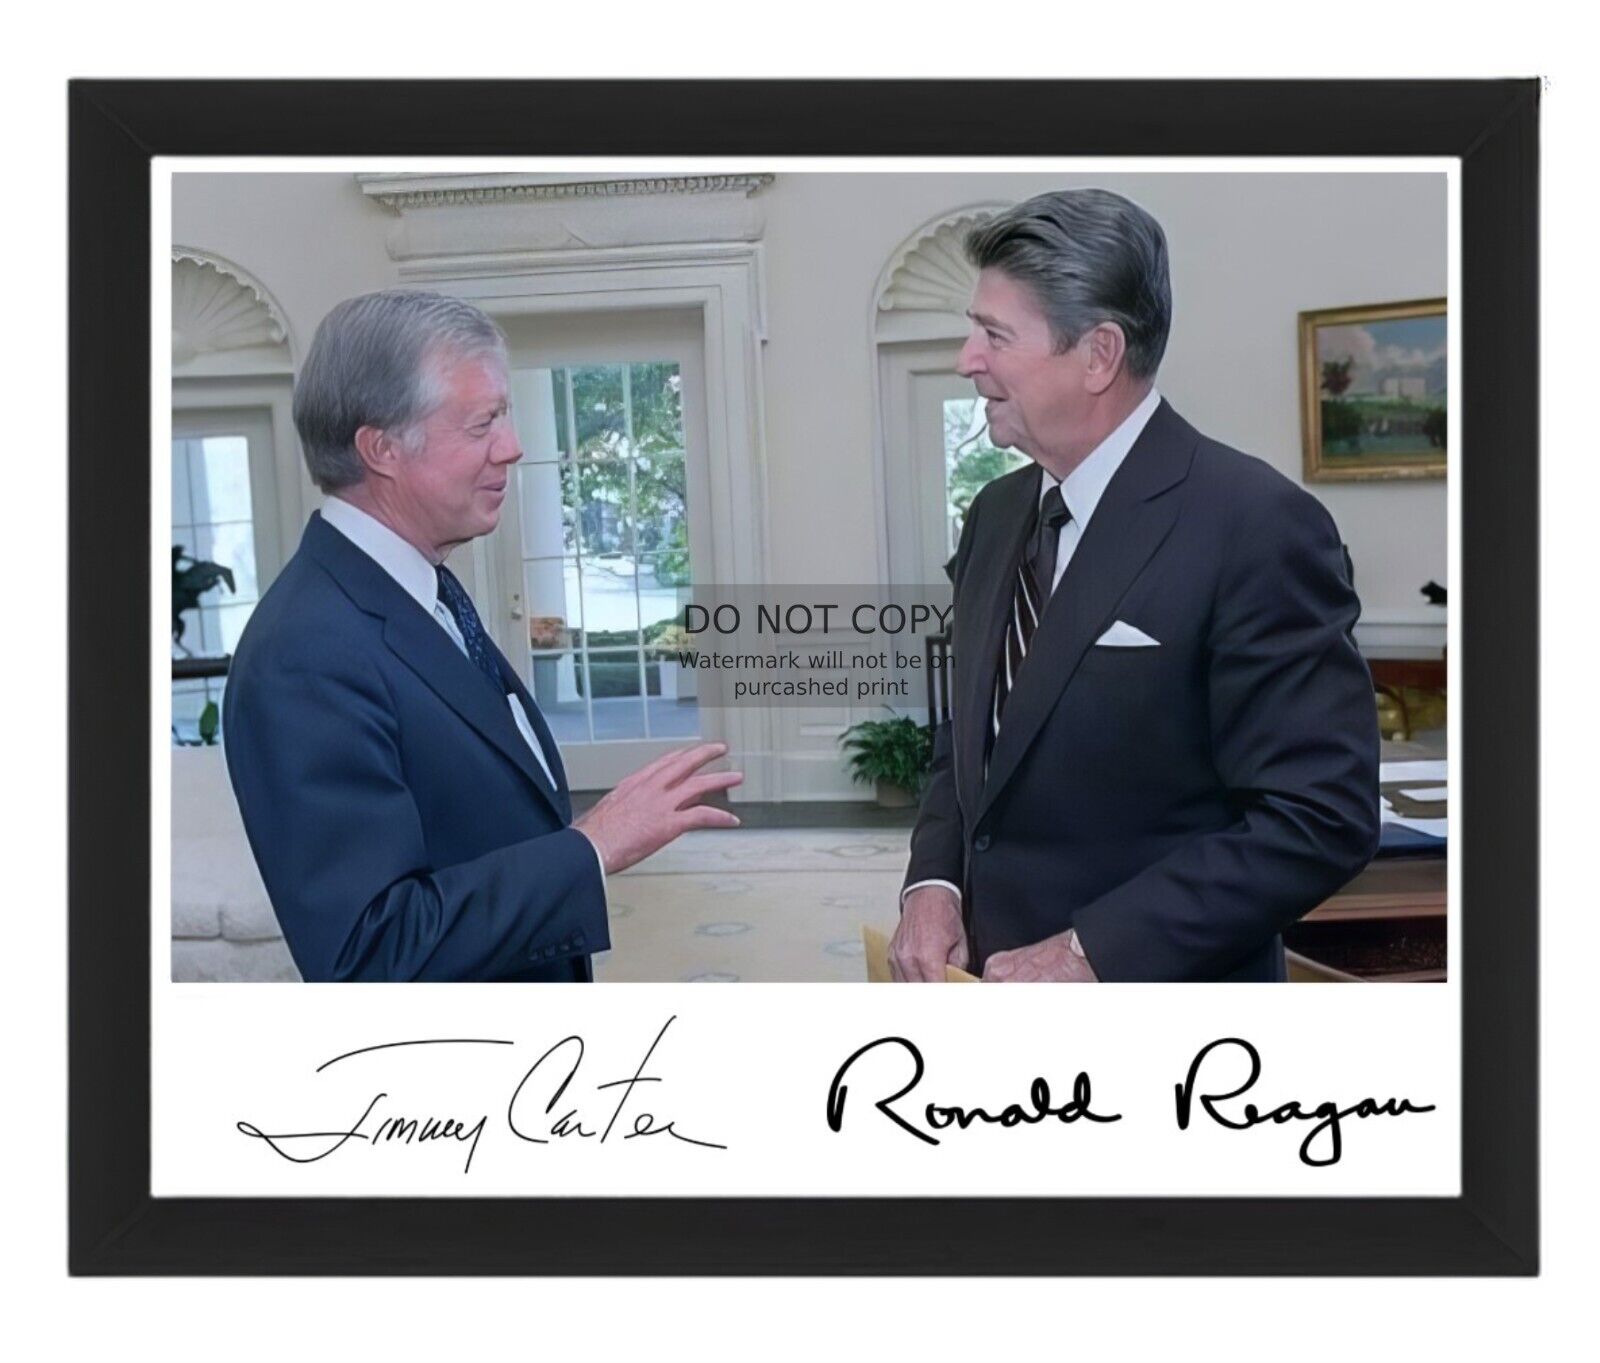 PRESIDENT RONALD REAGAN AND JIMMY CARTER IN THE OVAL OFFICE 8X10 FRAMED PHOTO